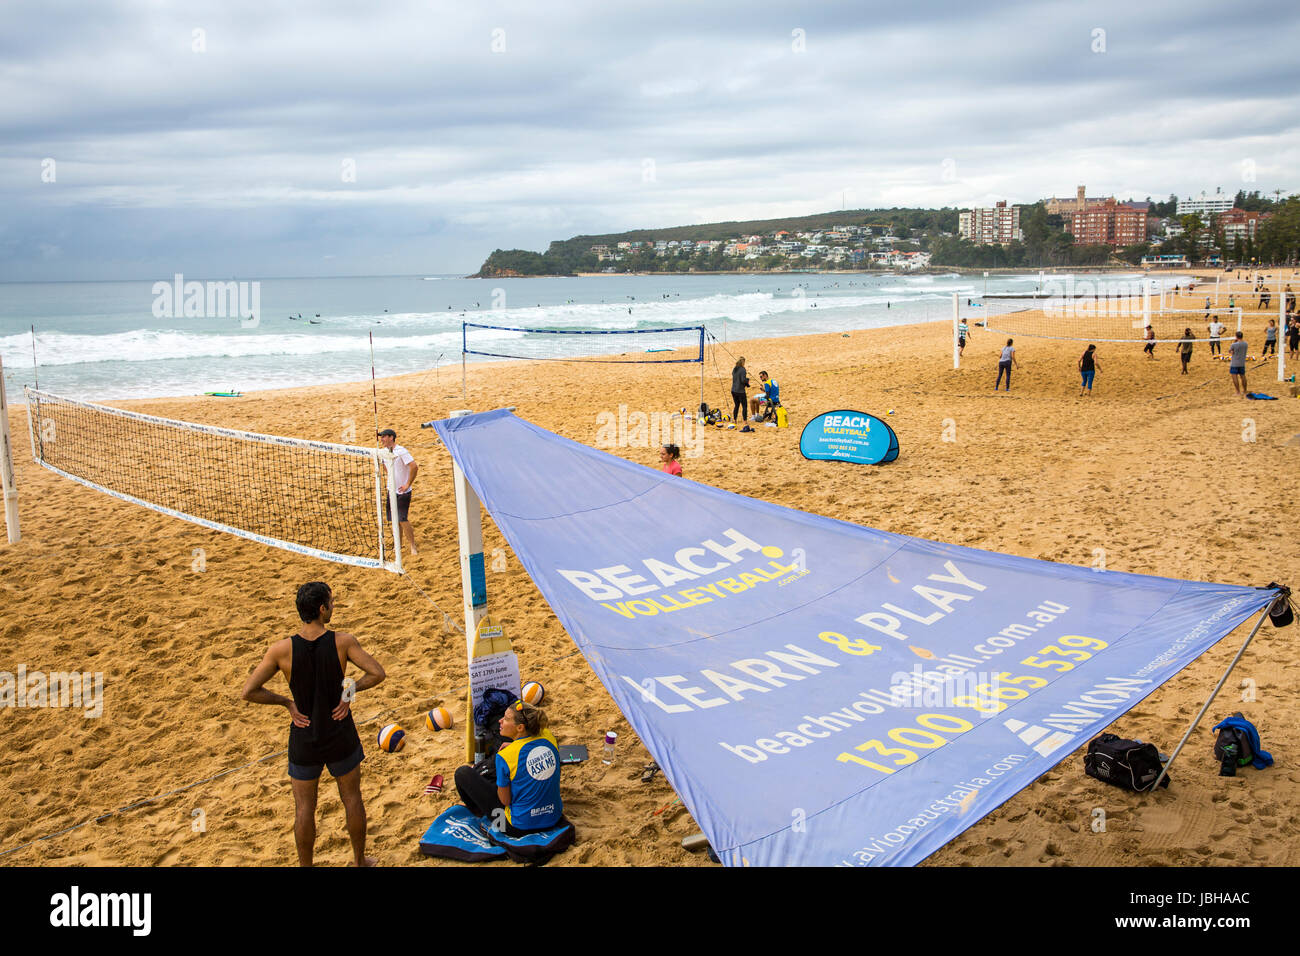 Playing and learning beach volleyball on Manly beach in Sydney,Australia Stock Photo